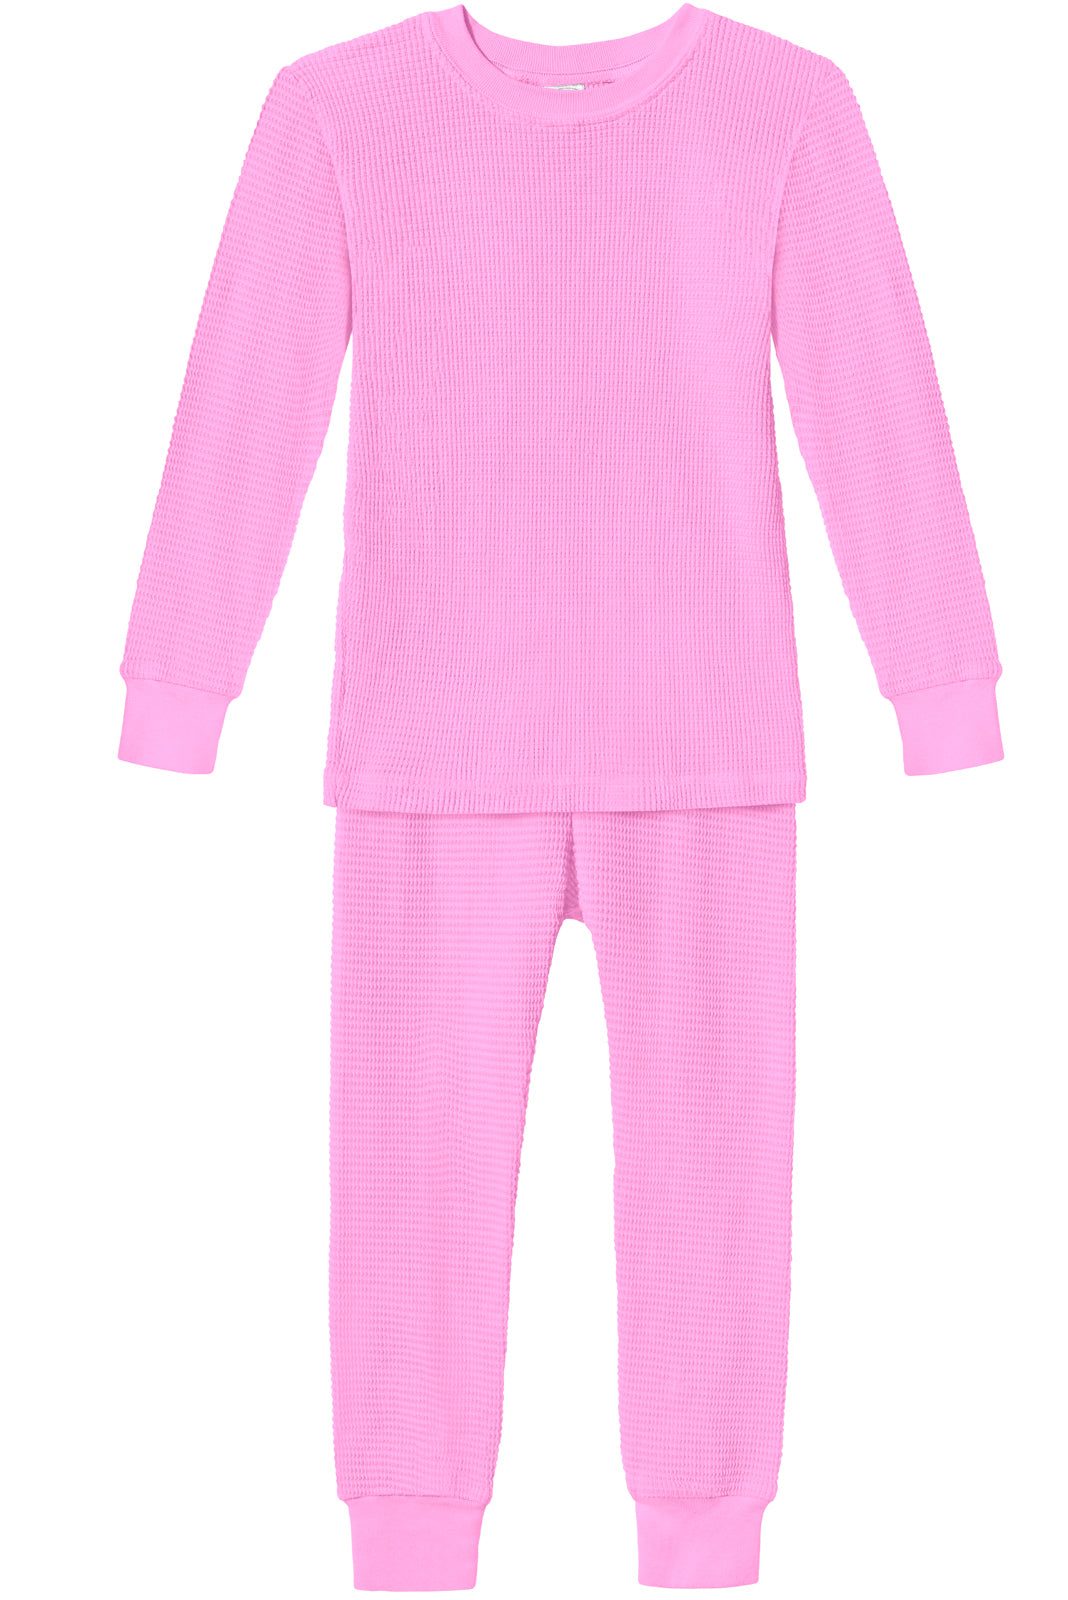 Rupa Torrido Kids Two-Piece Long Johns for Boys and Girls, Thermal  Underwear